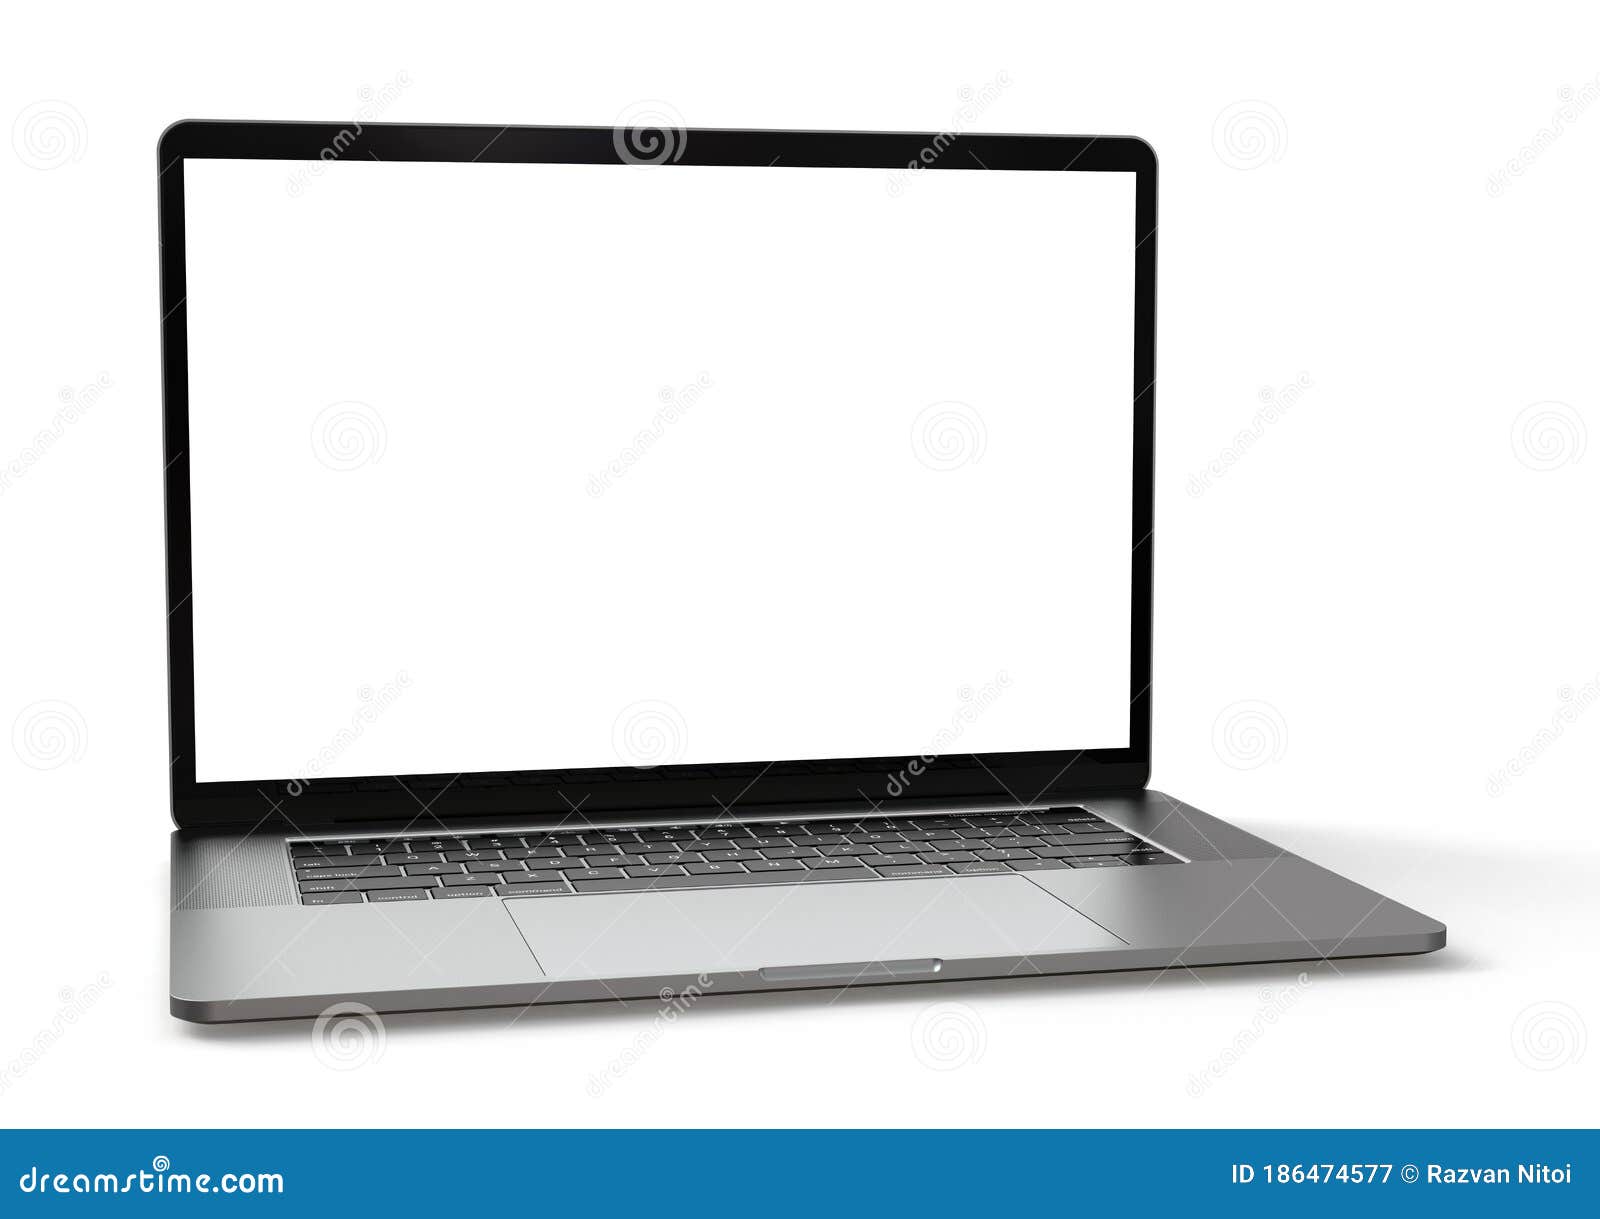 laptop computer macbook pro style, with blank screen on white background, for mockup